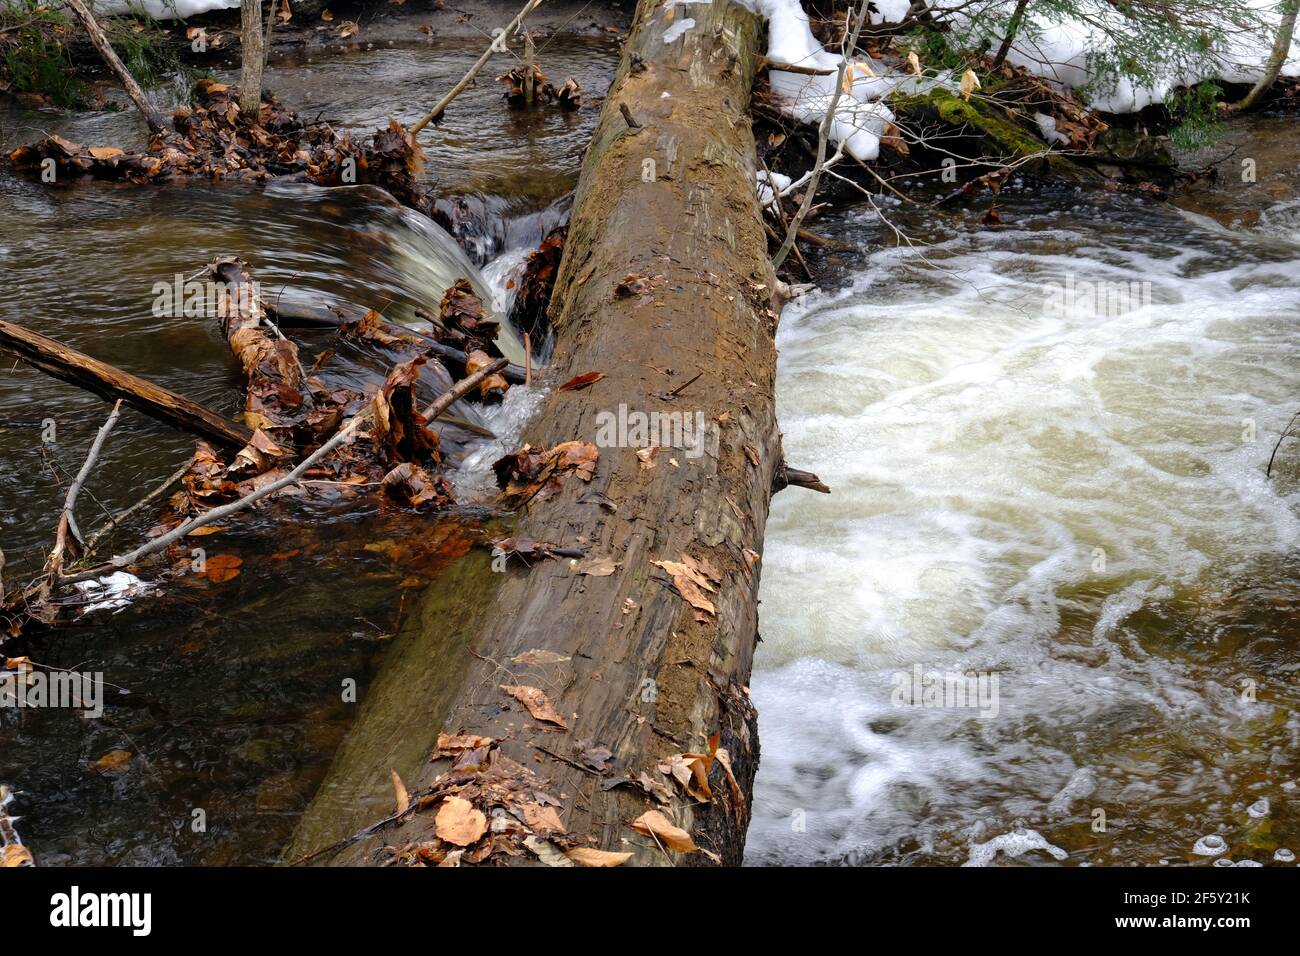 A small stream, swollen by snow melt, flows under a fallen tree trunk in a Quebec forest in early spring. Gatineau, Quebec, Canada. Stock Photo